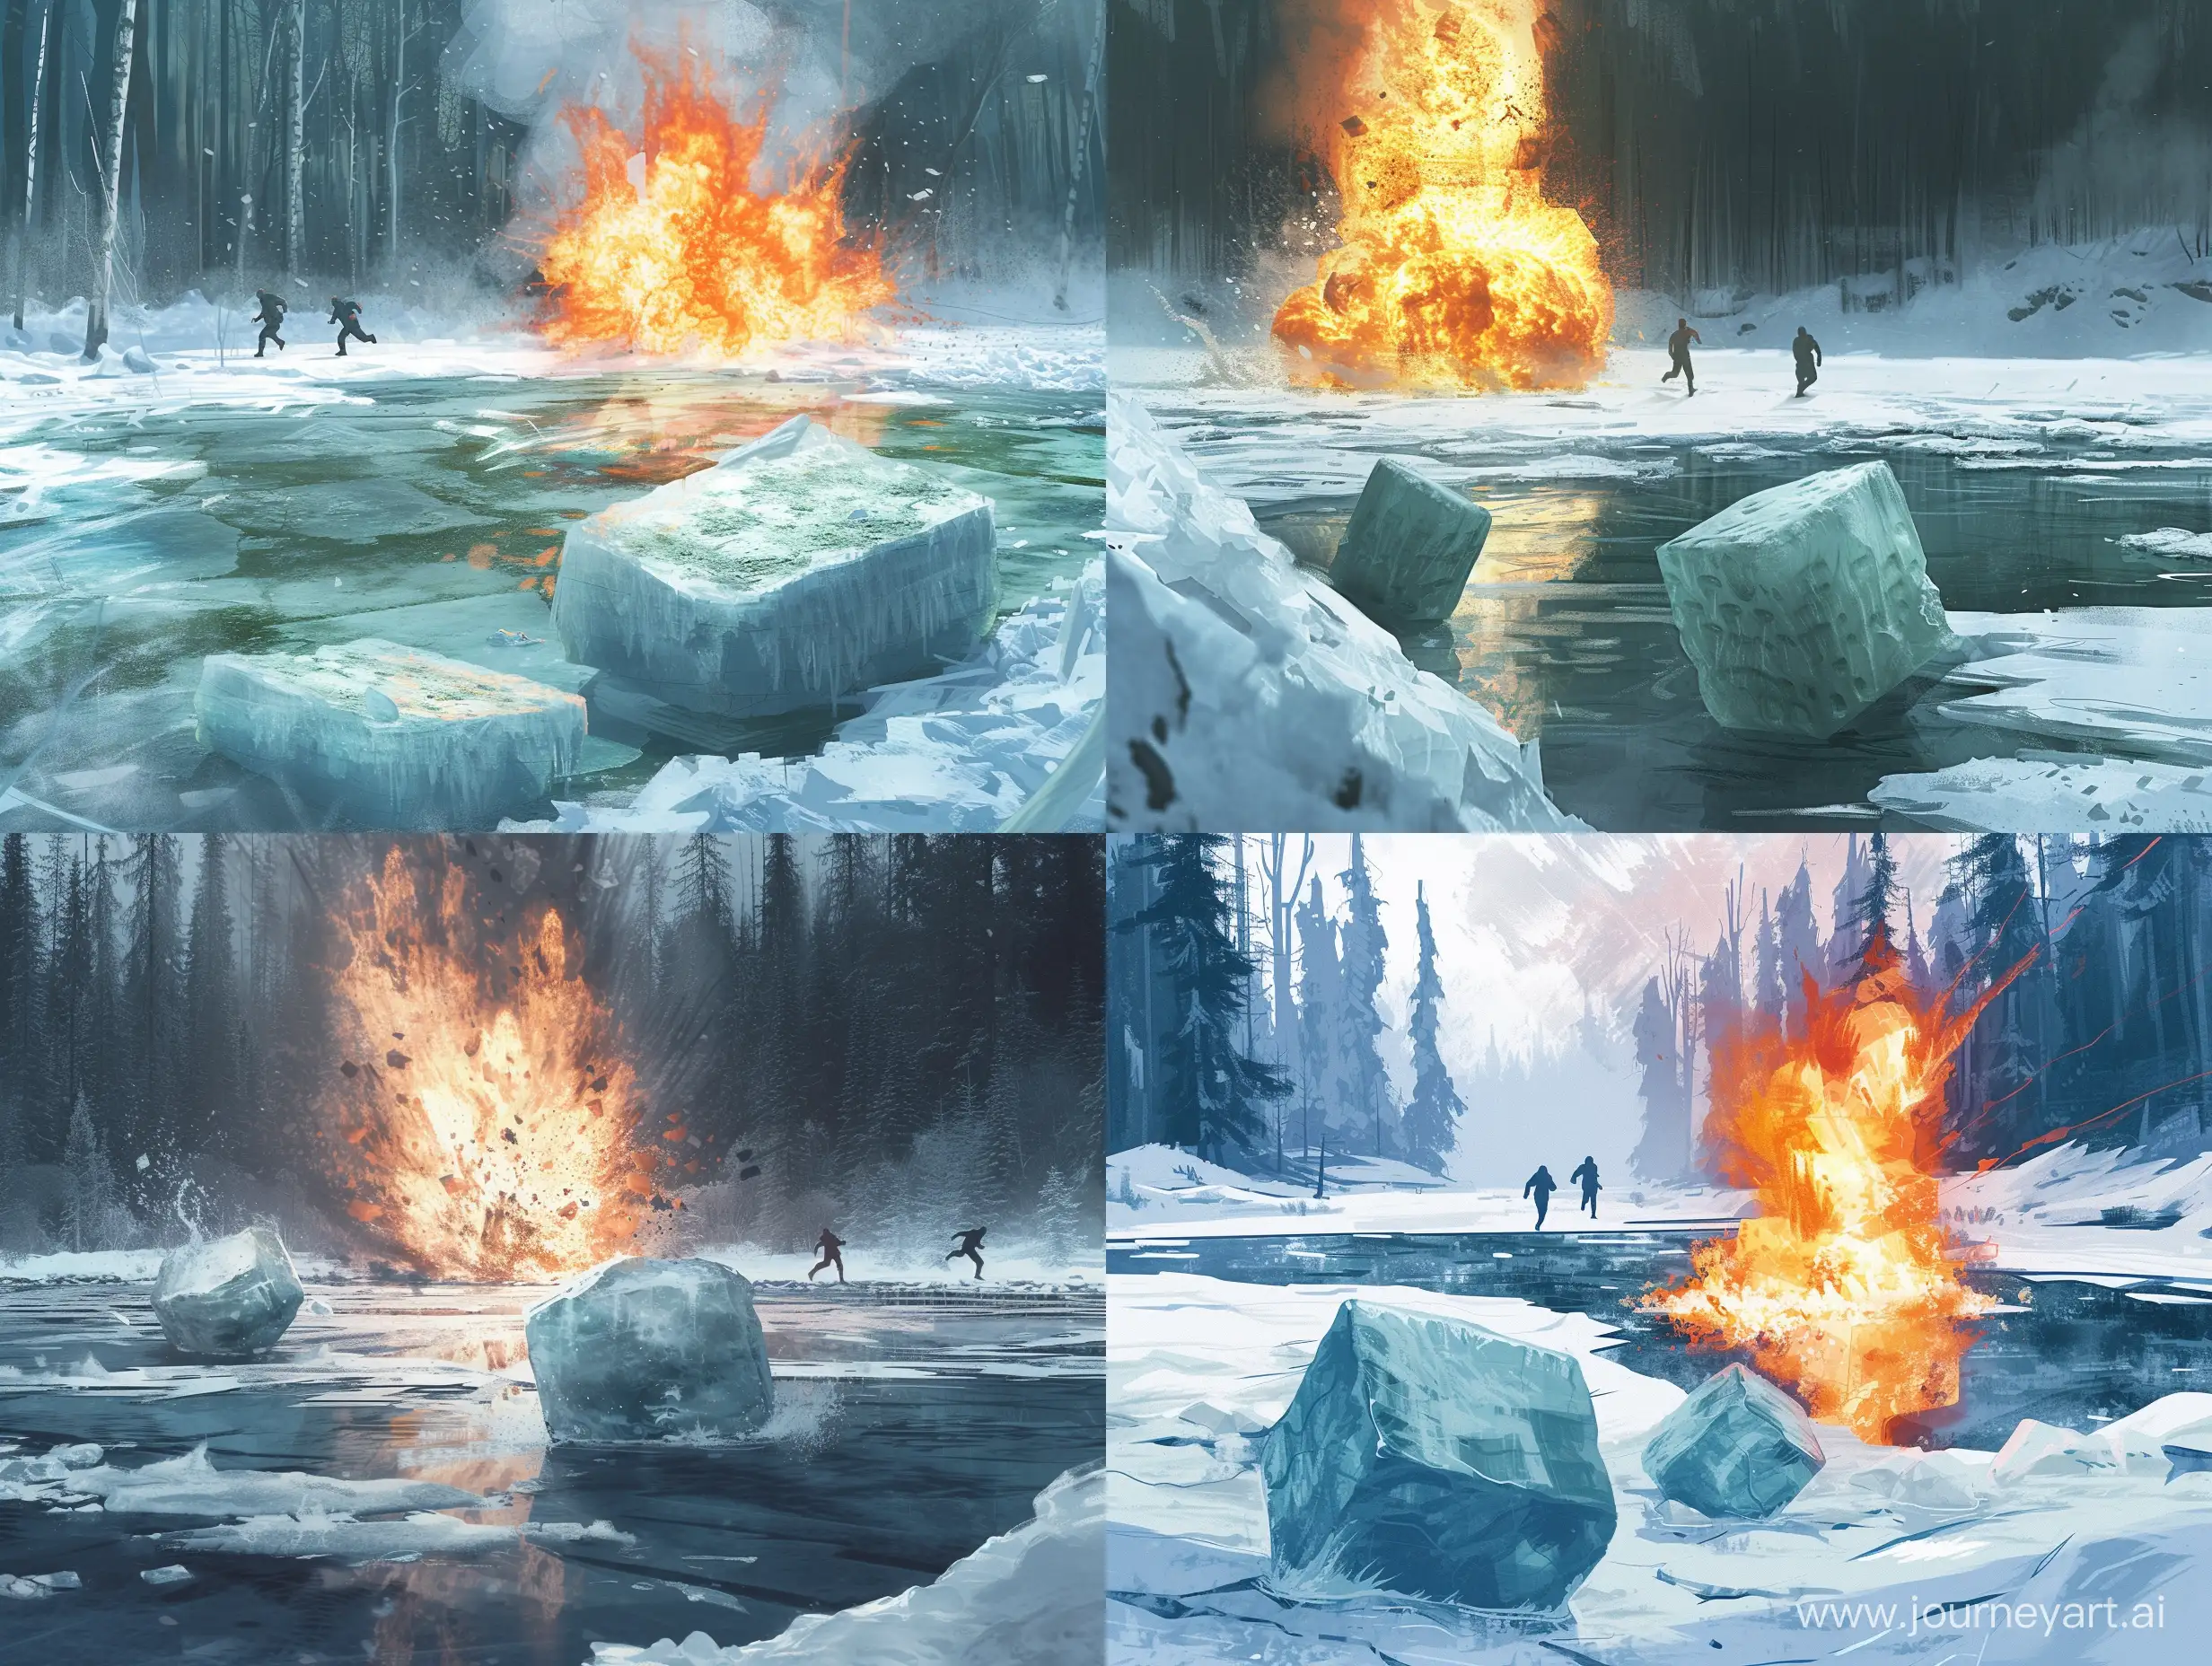 Apocalyptic-Forest-Thermal-Explosion-on-Ice-Lake-with-Running-Figures